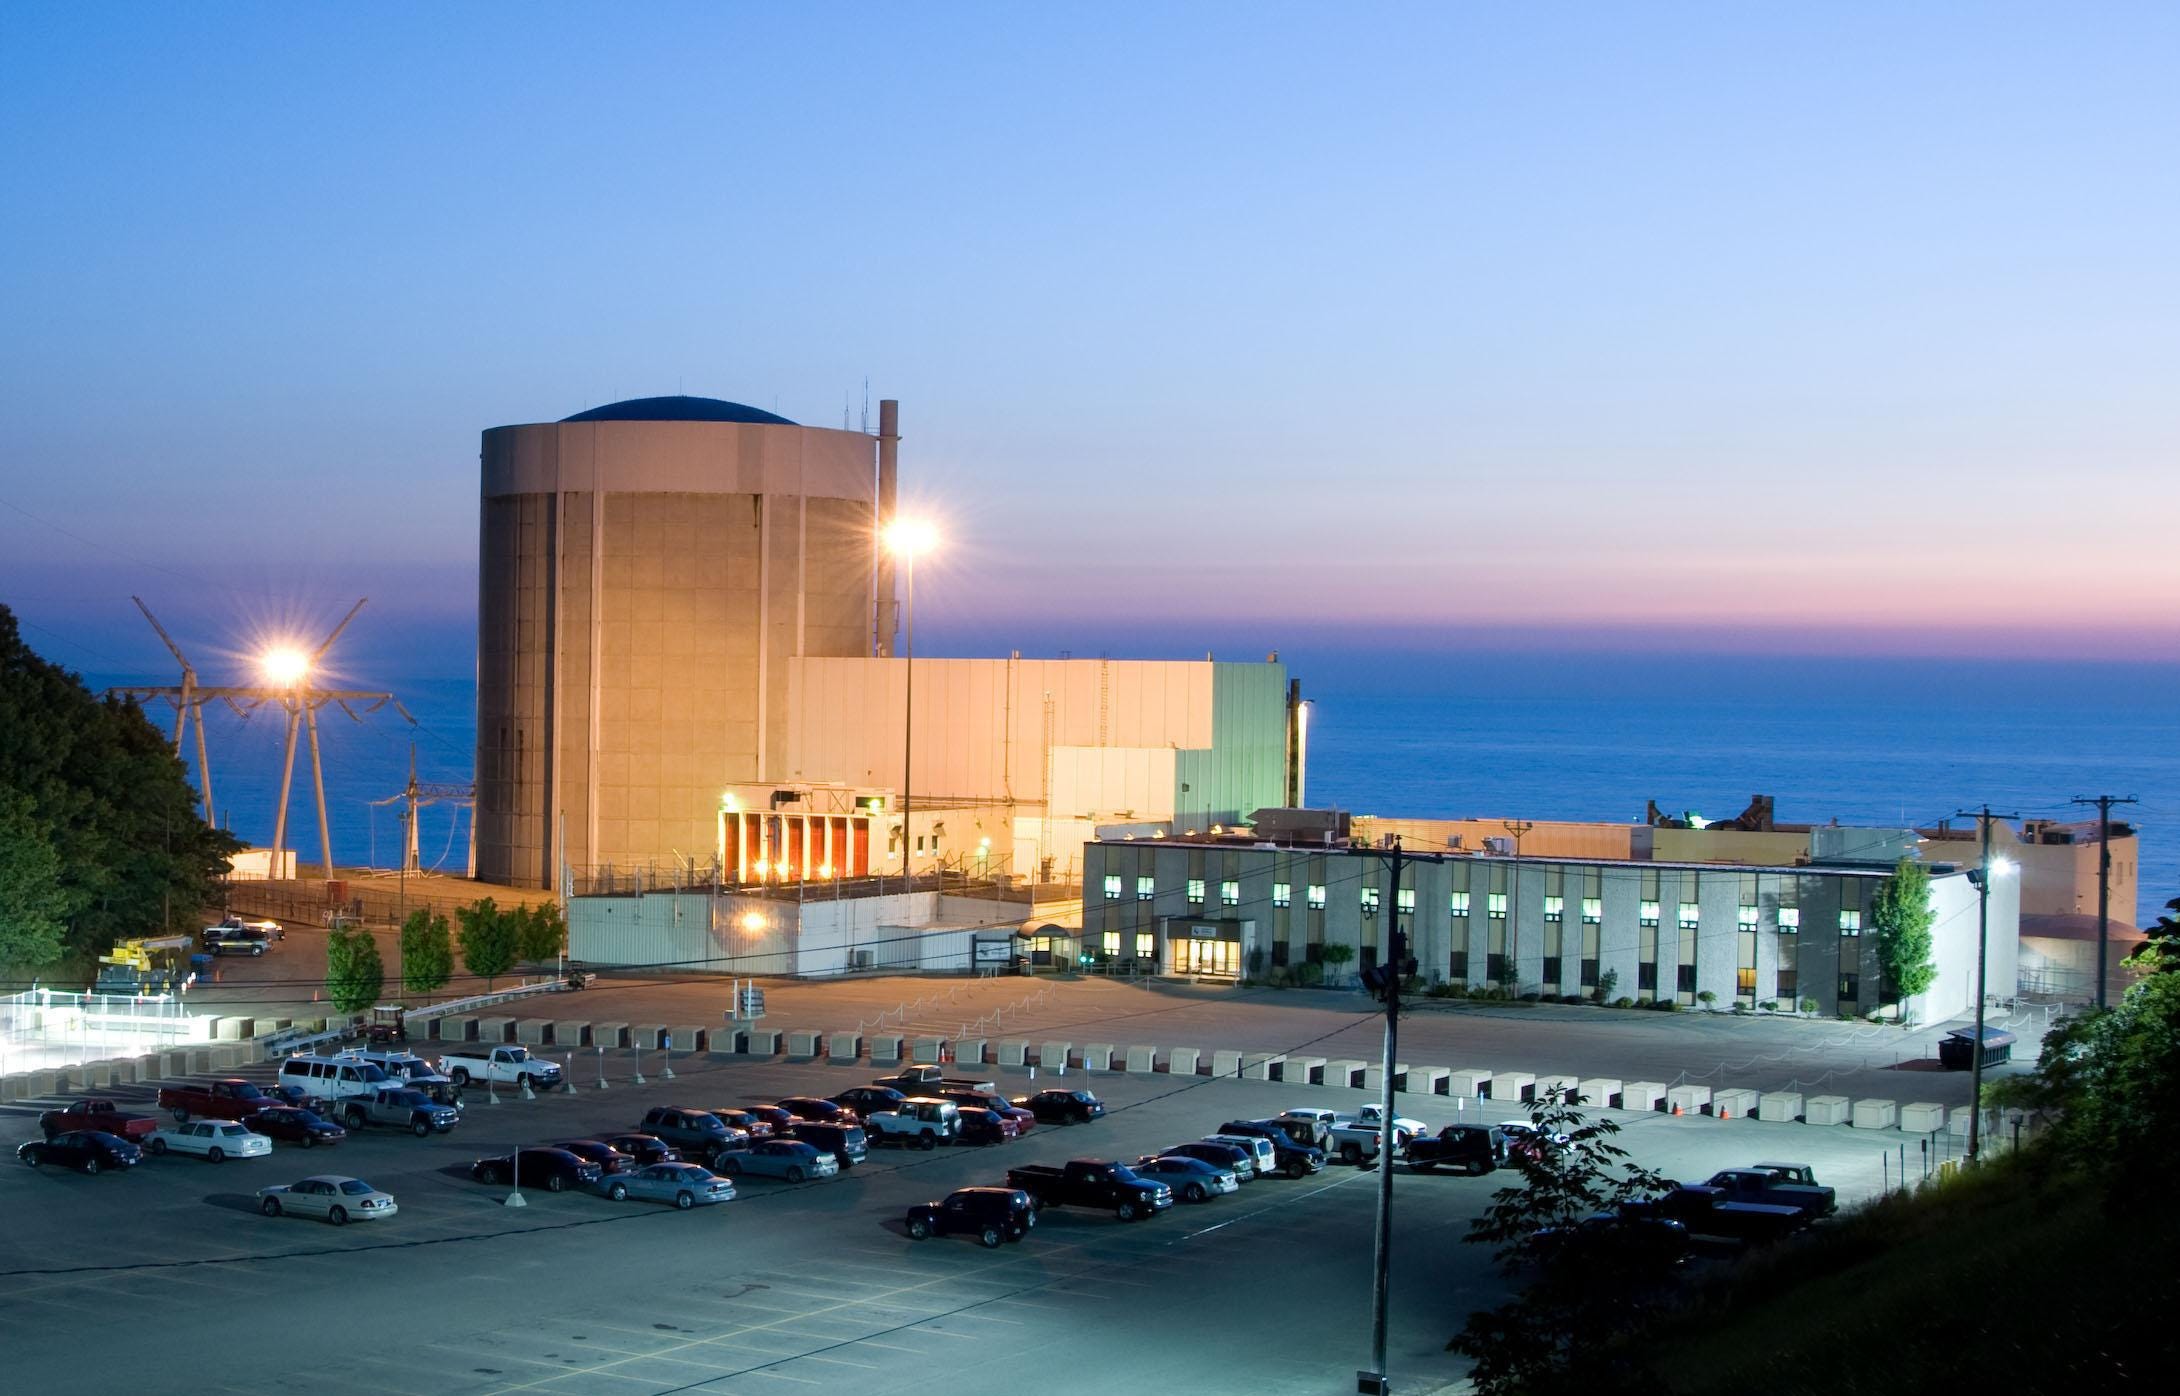 Holtec International has secured a power purchasing agreement for Palisades Nuclear Power Plant, should it be reopened.